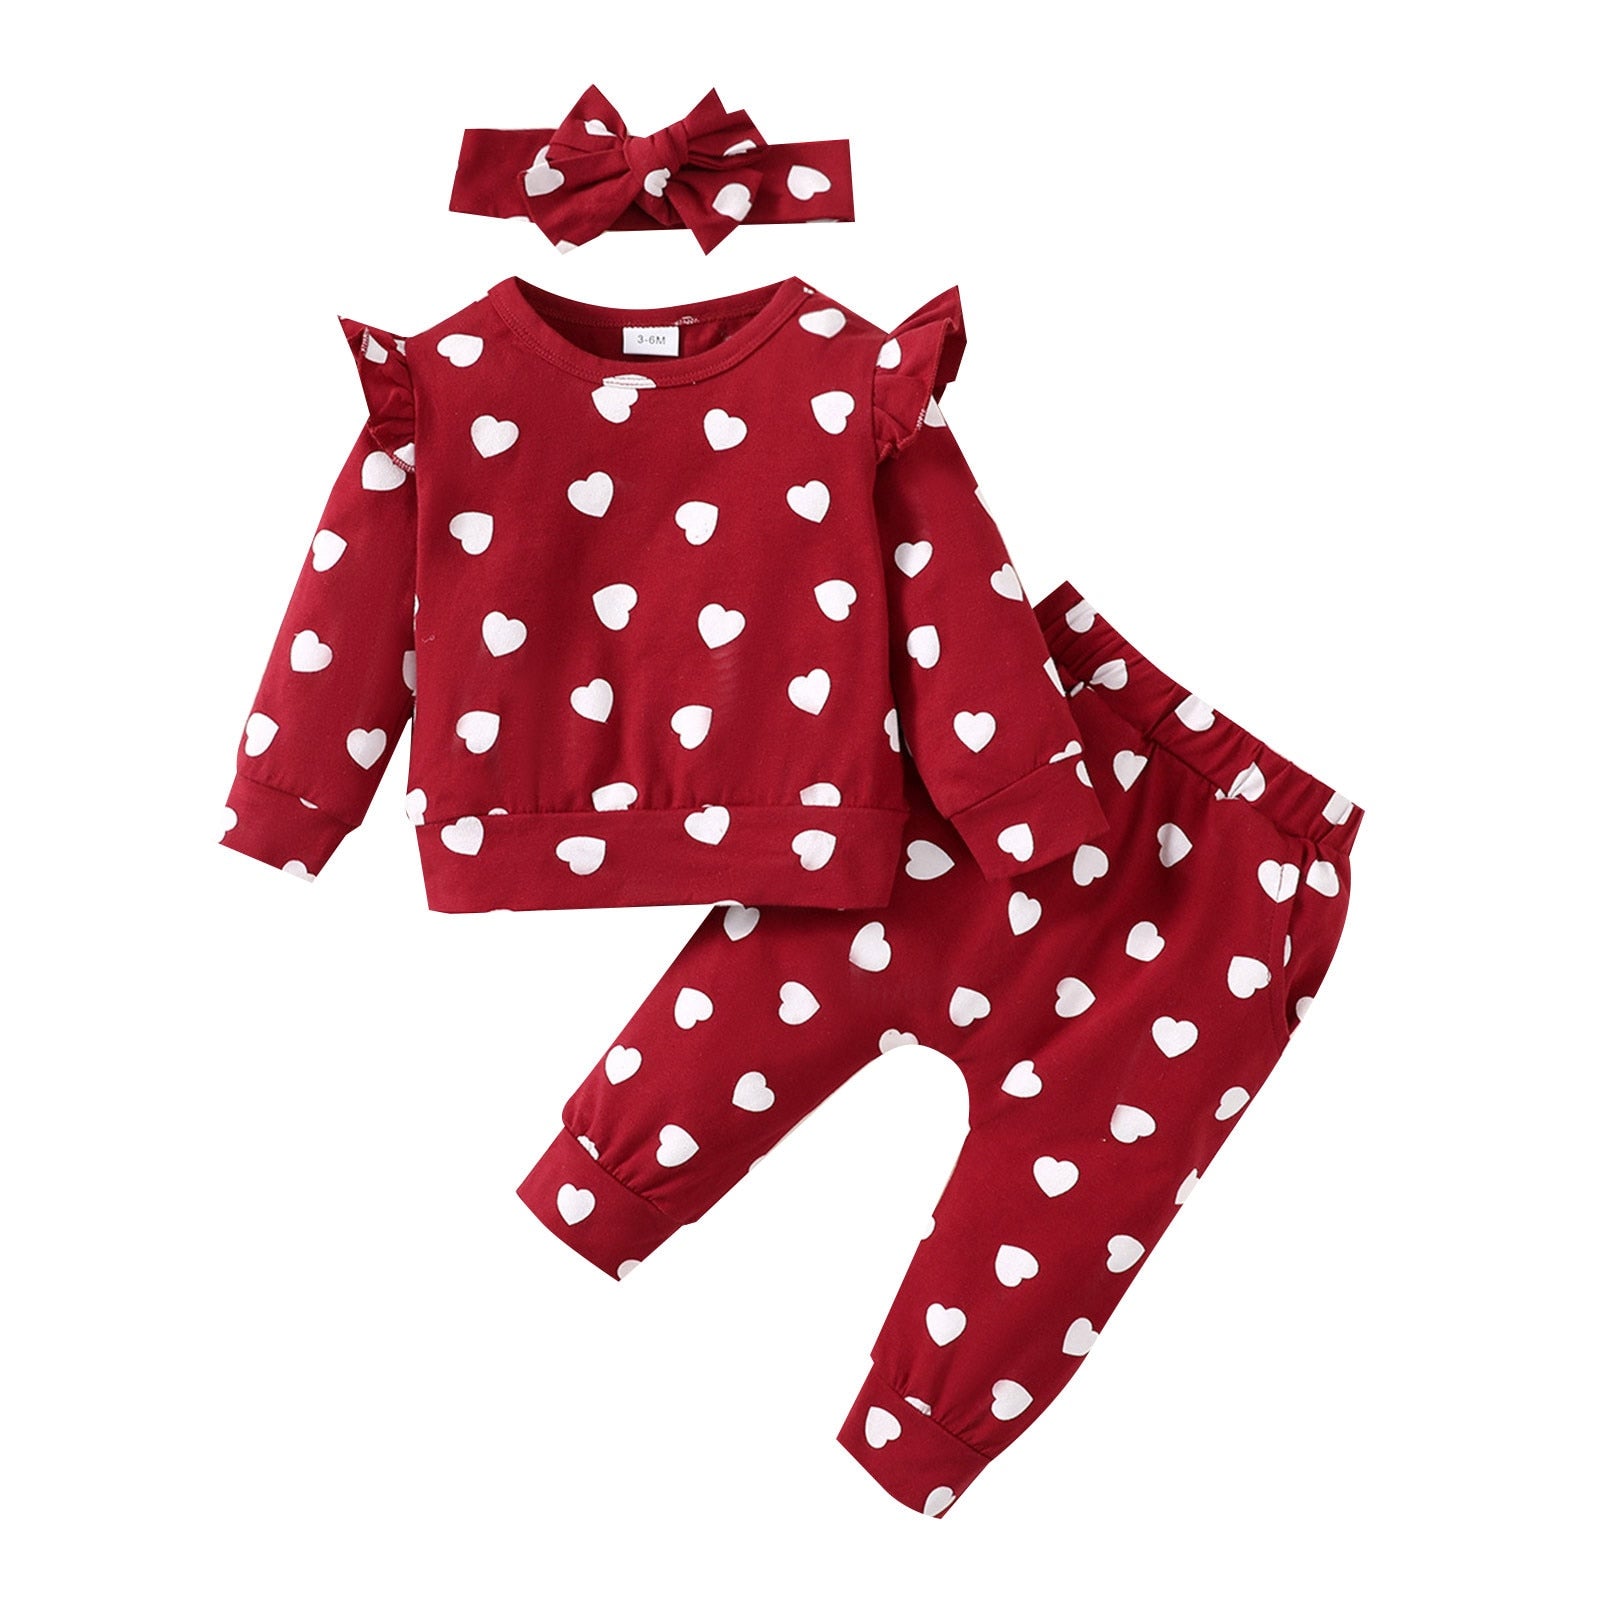 Adorable Valentine's Day Outfits for Your Little Princess